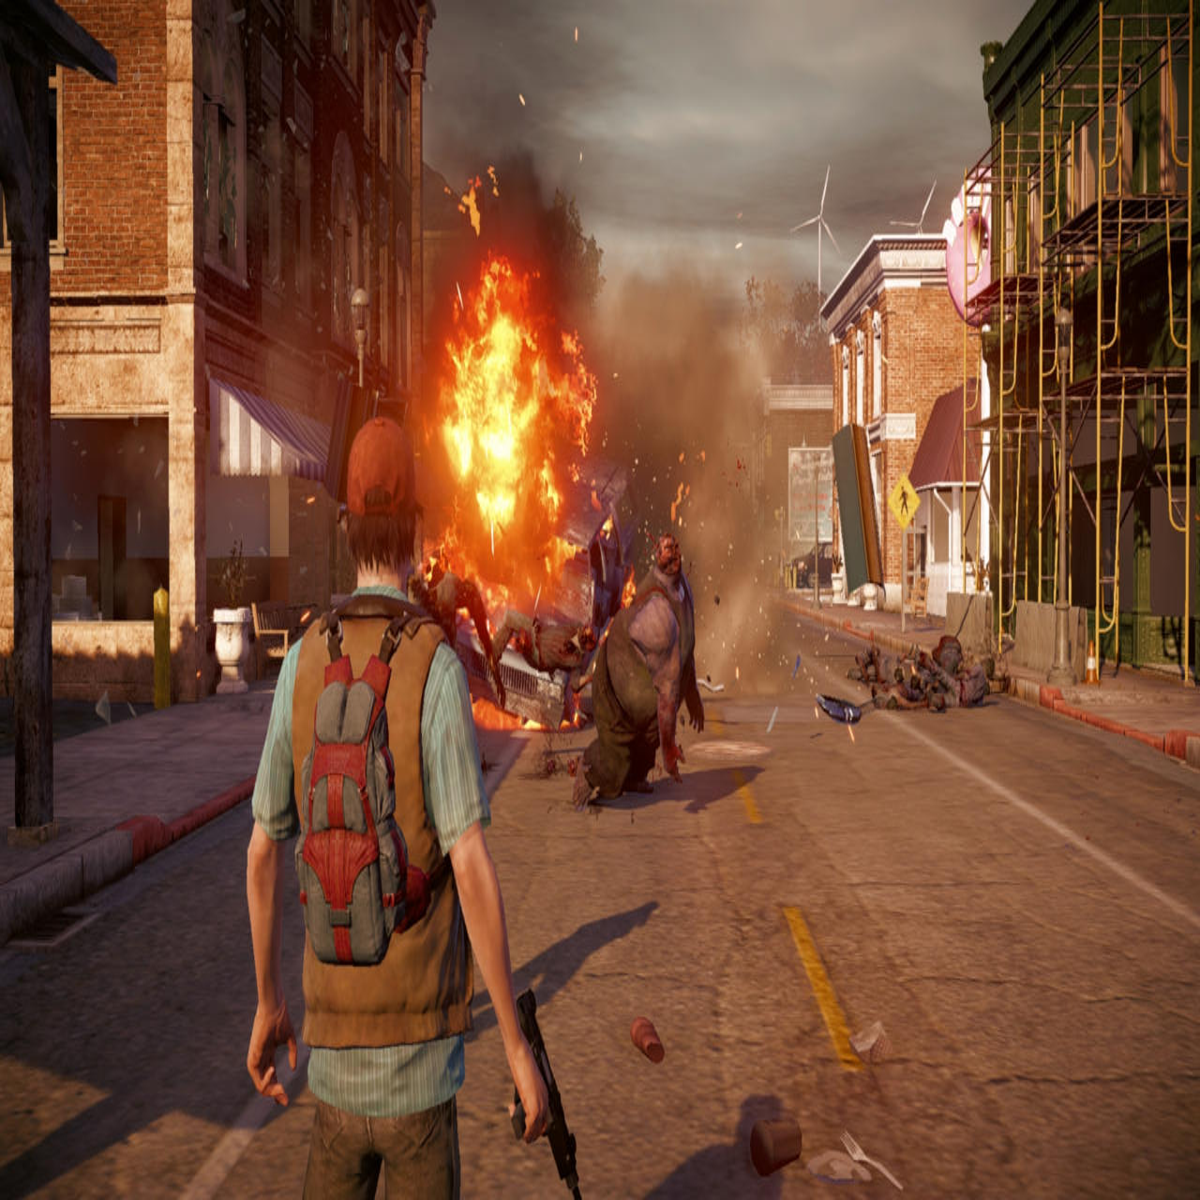 State of Decay 3 release date speculation, gameplay, more